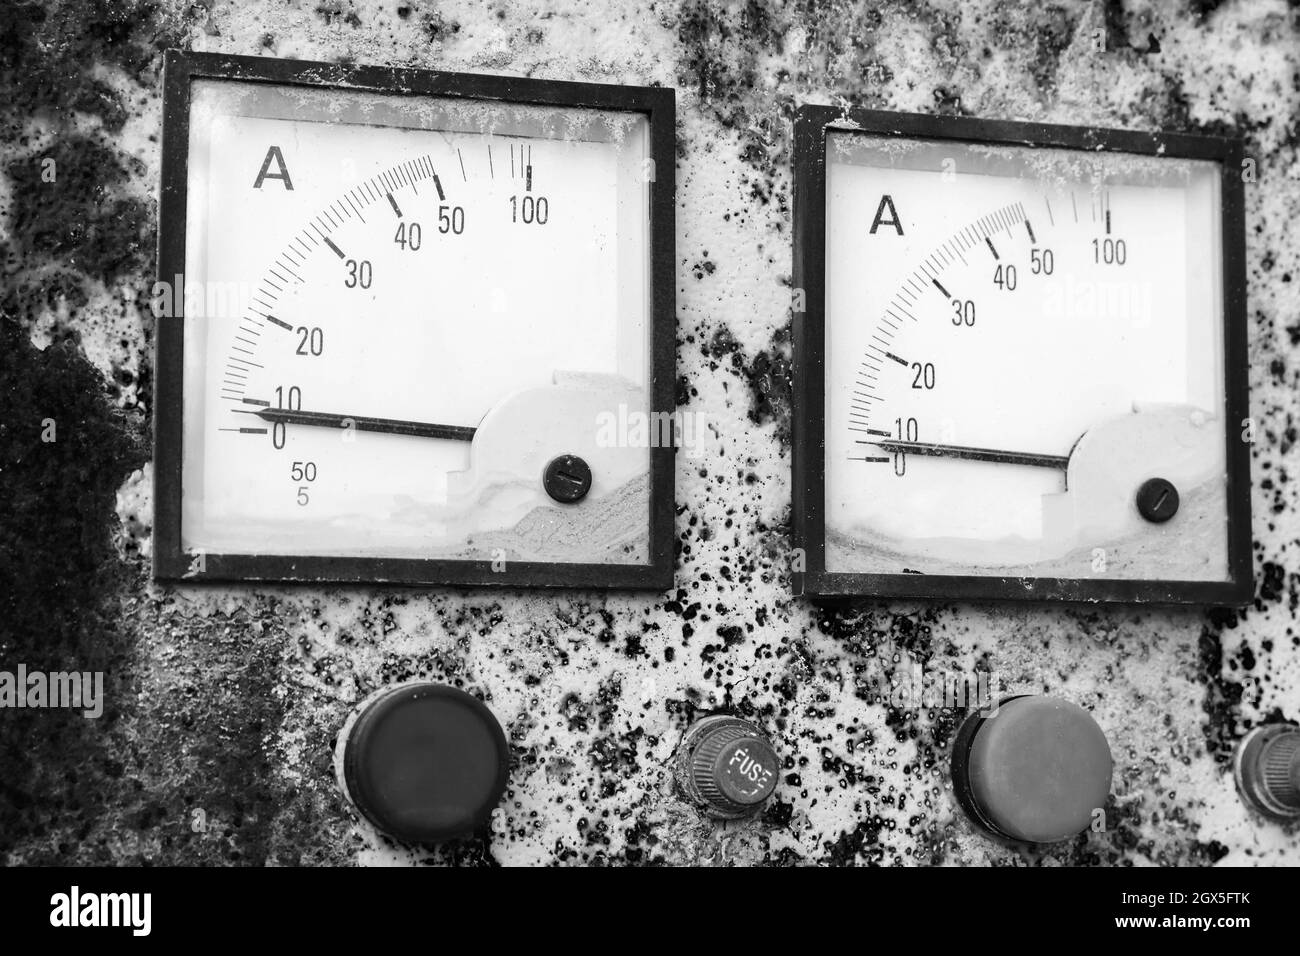 Two industrial square ammeters show zero power level, close up photo of a rusty old electric control panel. Vintage stylized black and white photo Stock Photo